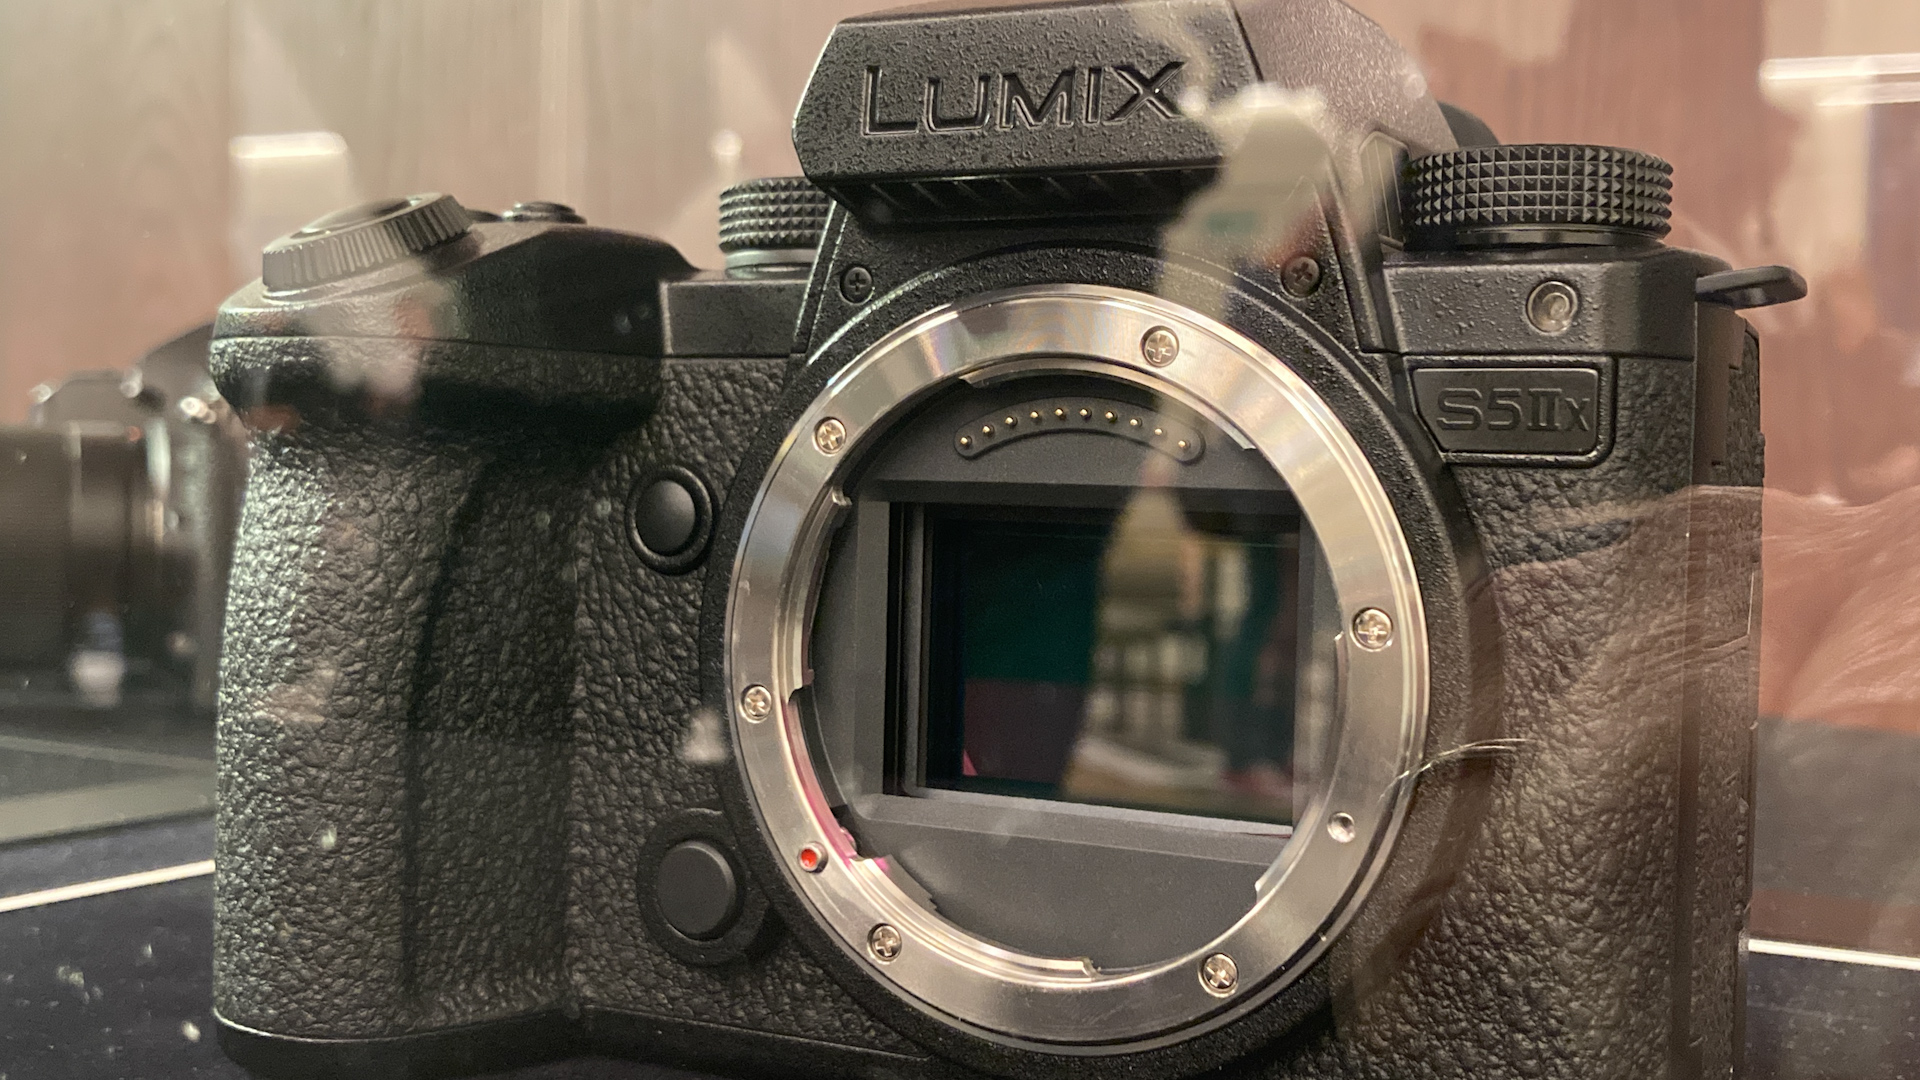 Top-Rated Panasonic Lumix S5 Gets Its First Update With Phase